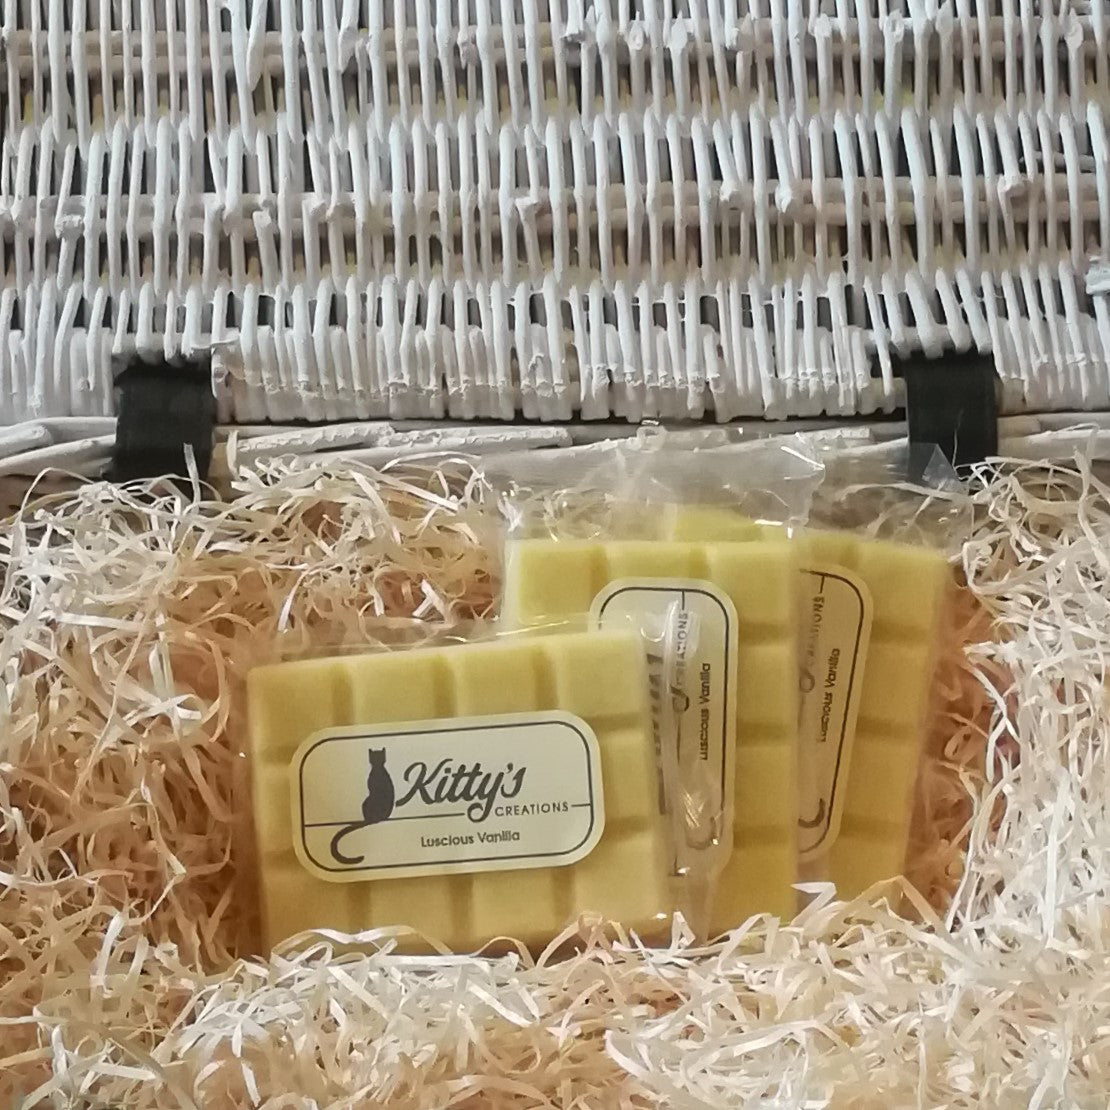 Three hand-made rectangular Wax Melts. Each is coloured a light refreshing yellow, are pictured resting in a basket of straw. A rich and creamy blend of Madagascan vanilla pods, nutmeg and crushed nuts, whipped to a delicious blend, better than any ice-cream you can imagine.